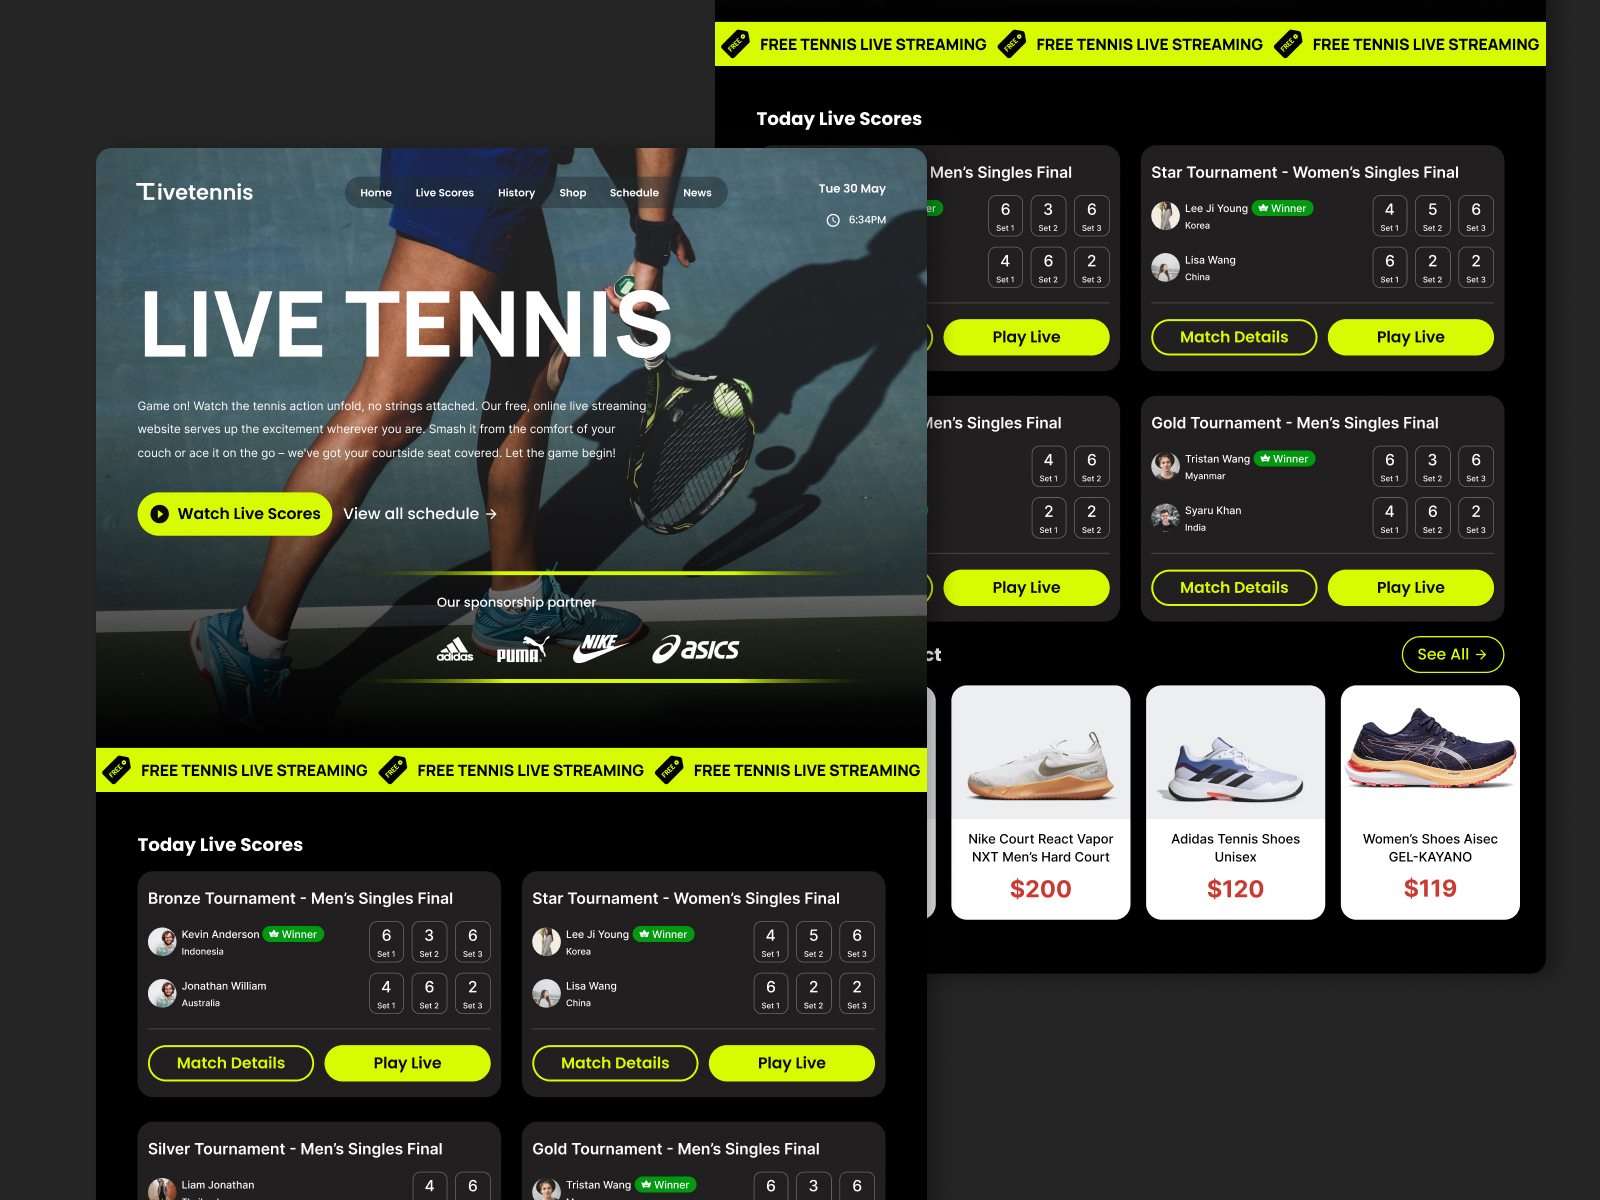 Tennis Live Streaming Landing Page by Jodith Valerie on Dribbble